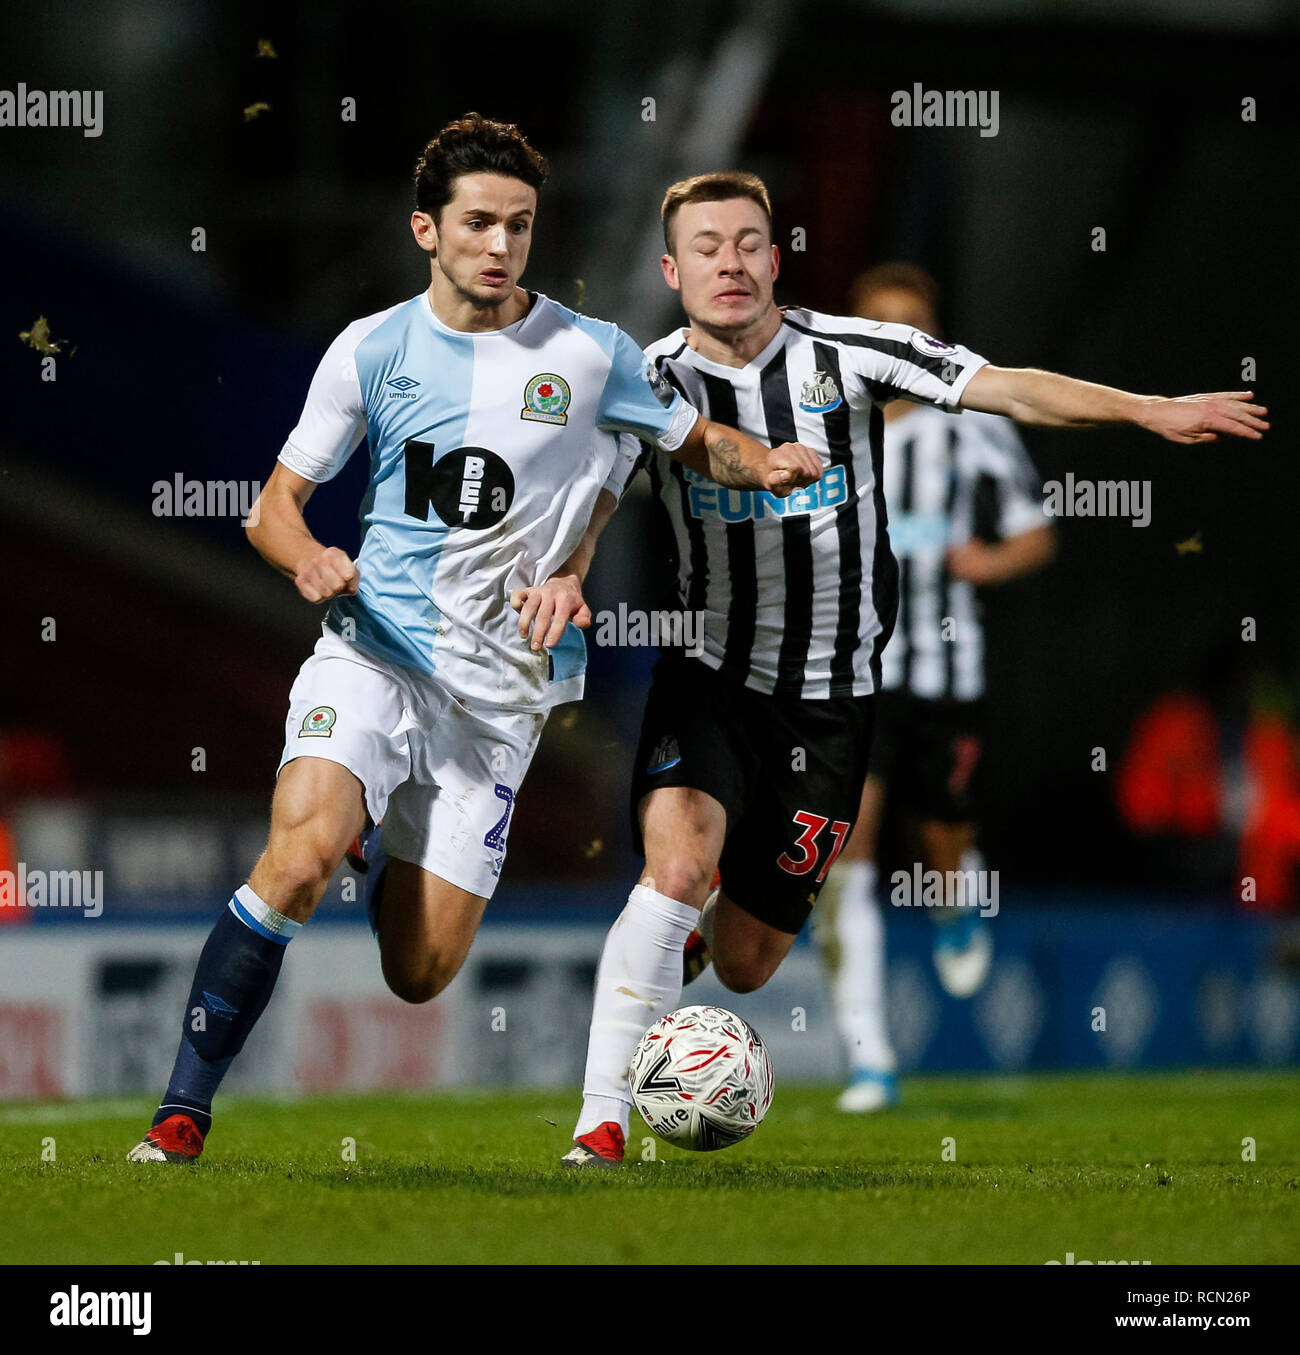 Blackburn, Lancashire, UK. 15th Jan 2019. Lewis Travis of Blackburn Rovers and Callum Roberts of Newcastle United during the FA Cup Third Round replay between Blackburn Rovers and Newcastle United at Ewood Park on January 15th 2019 in Blackburn, England. (Photo by Daniel Chesterton/phcimages.com) Credit: PHC Images/Alamy Live News Stock Photo